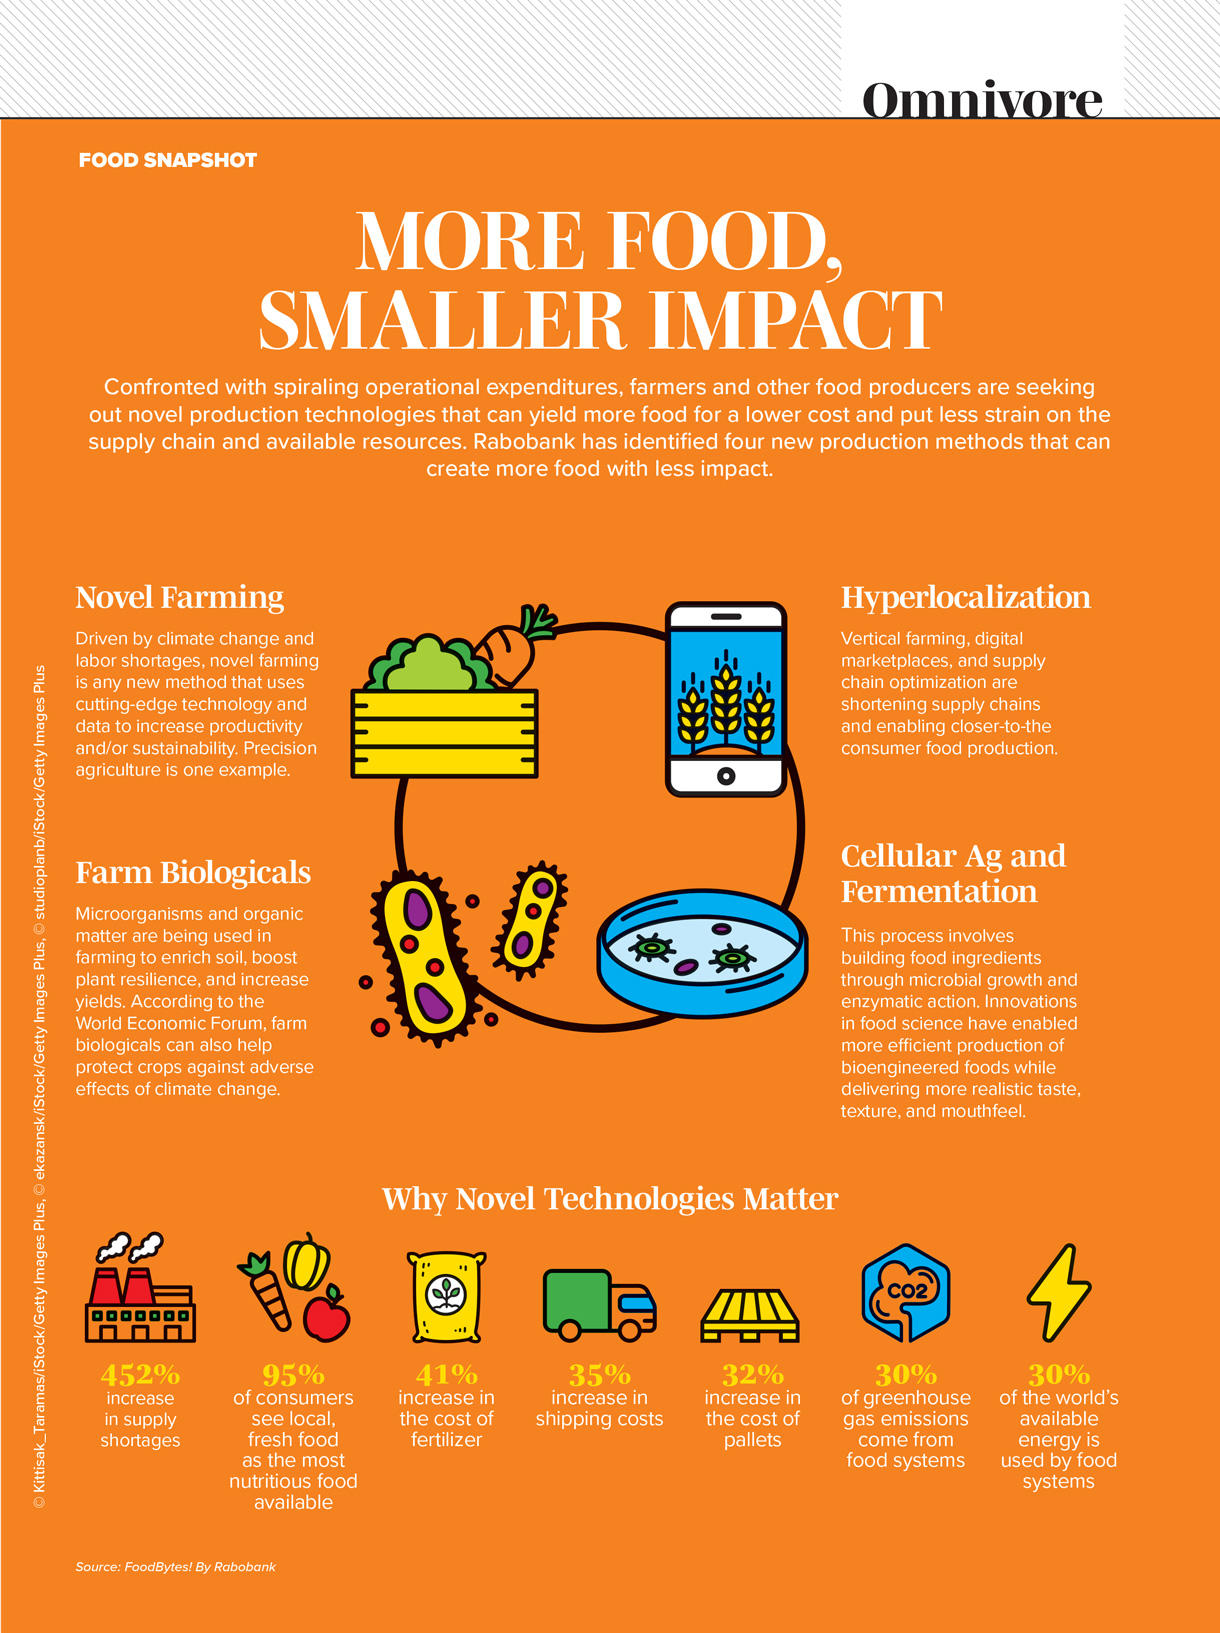 More Food, Smaller Impact